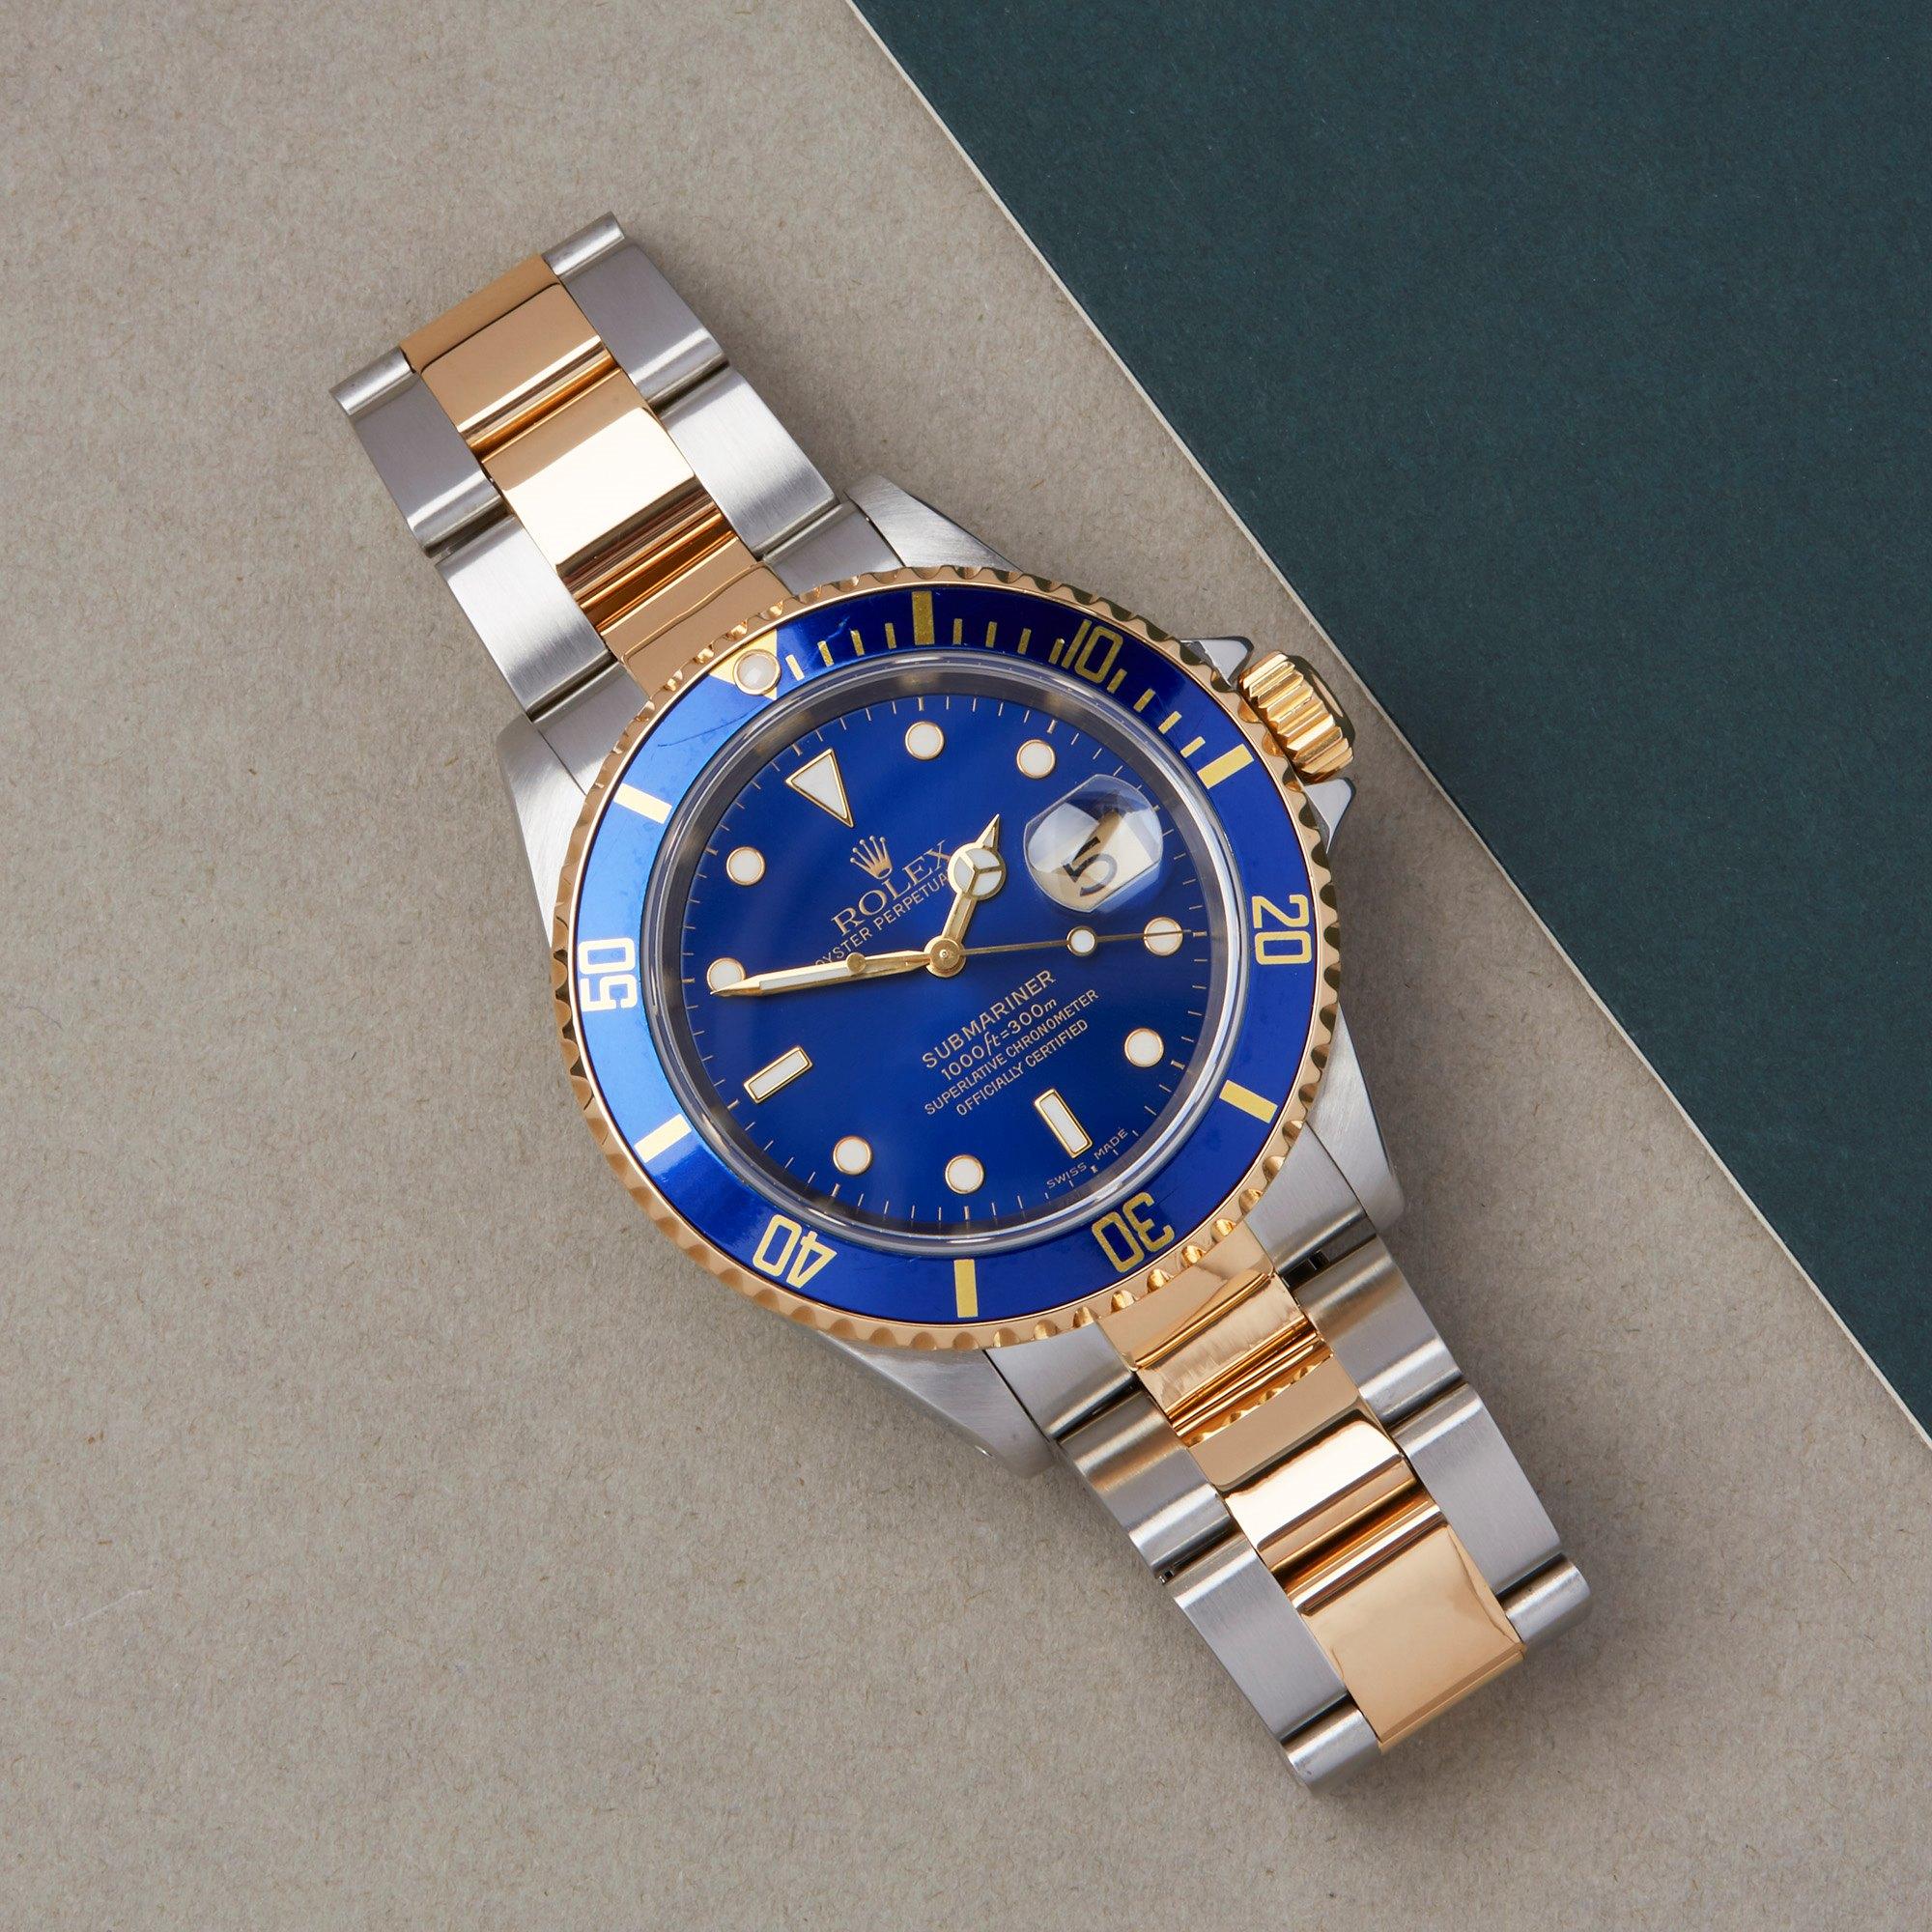 Xupes Reference: W007676
Manufacturer: Rolex
Model: Submariner
Model Variant: Date
Model Number: 16613
Age: 37203
Gender: Men
Complete With: Rolex Box, Manuals, Guarantee, Calendar Card, Card Holder & Swing Tag
Dial: Blue Other
Glass: Sapphire